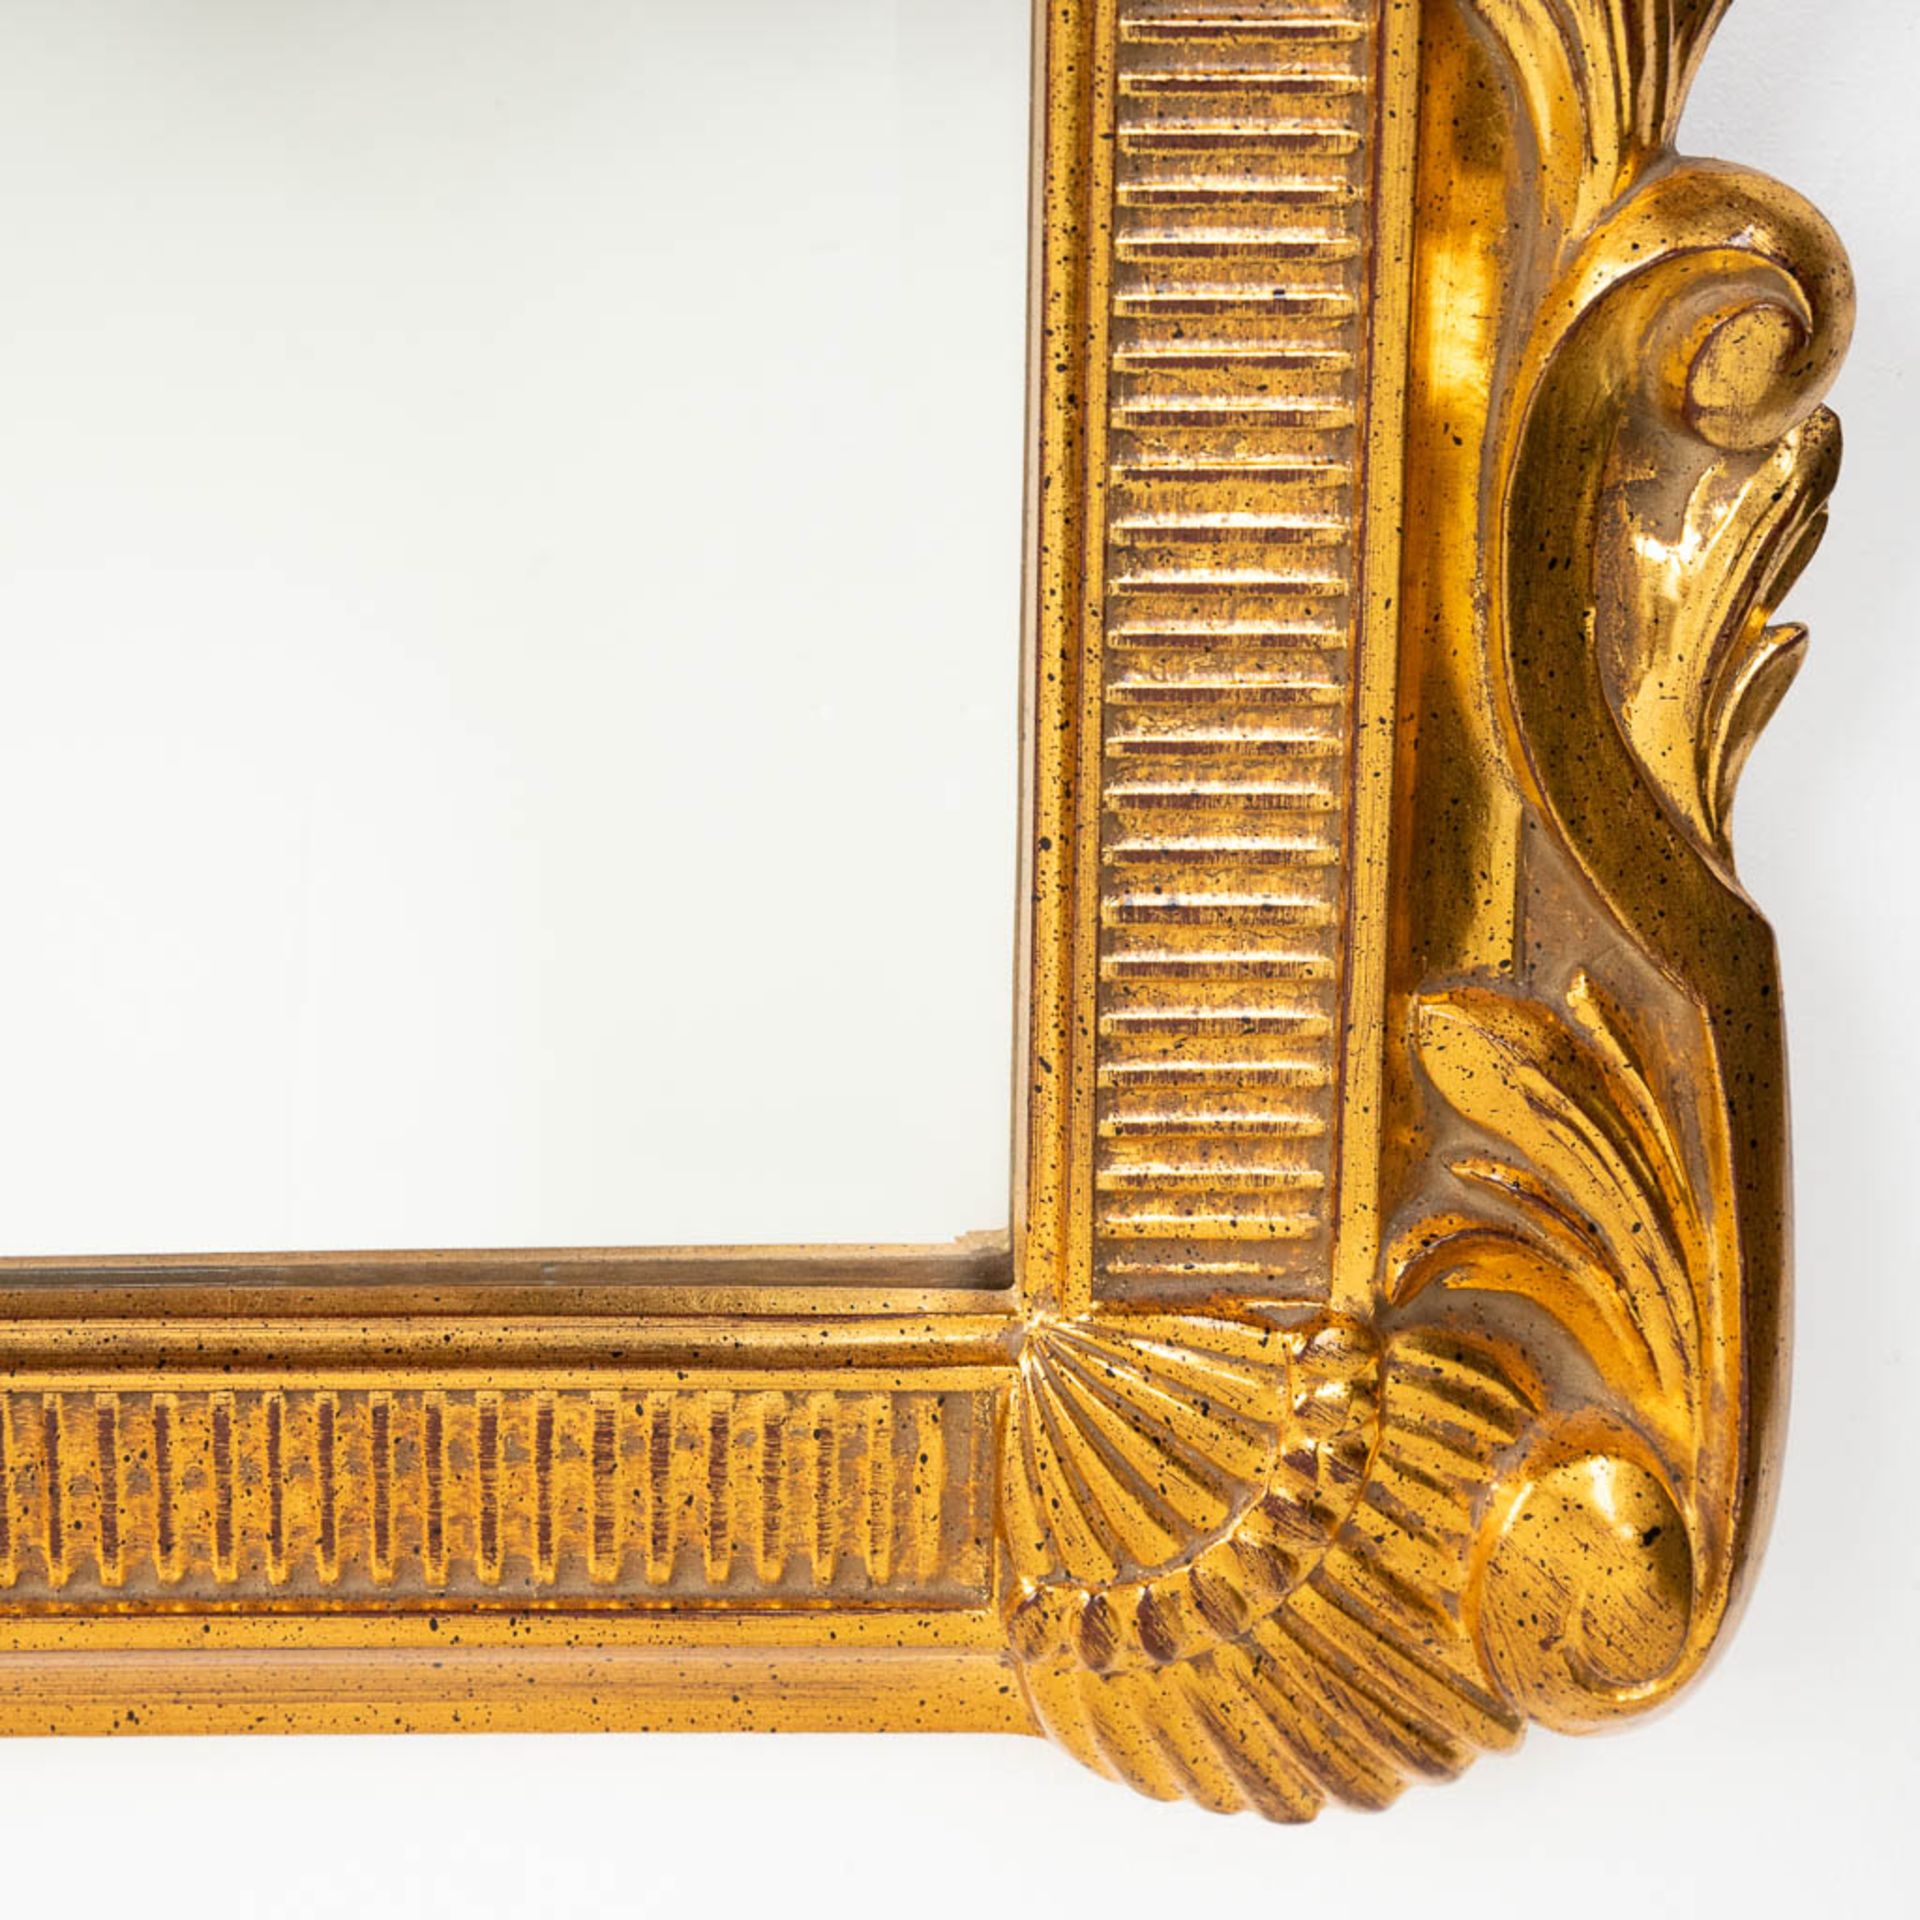 Deknudt, a gold-plated mirror. 20th C. (W:76 x H:124 cm) - Image 4 of 7